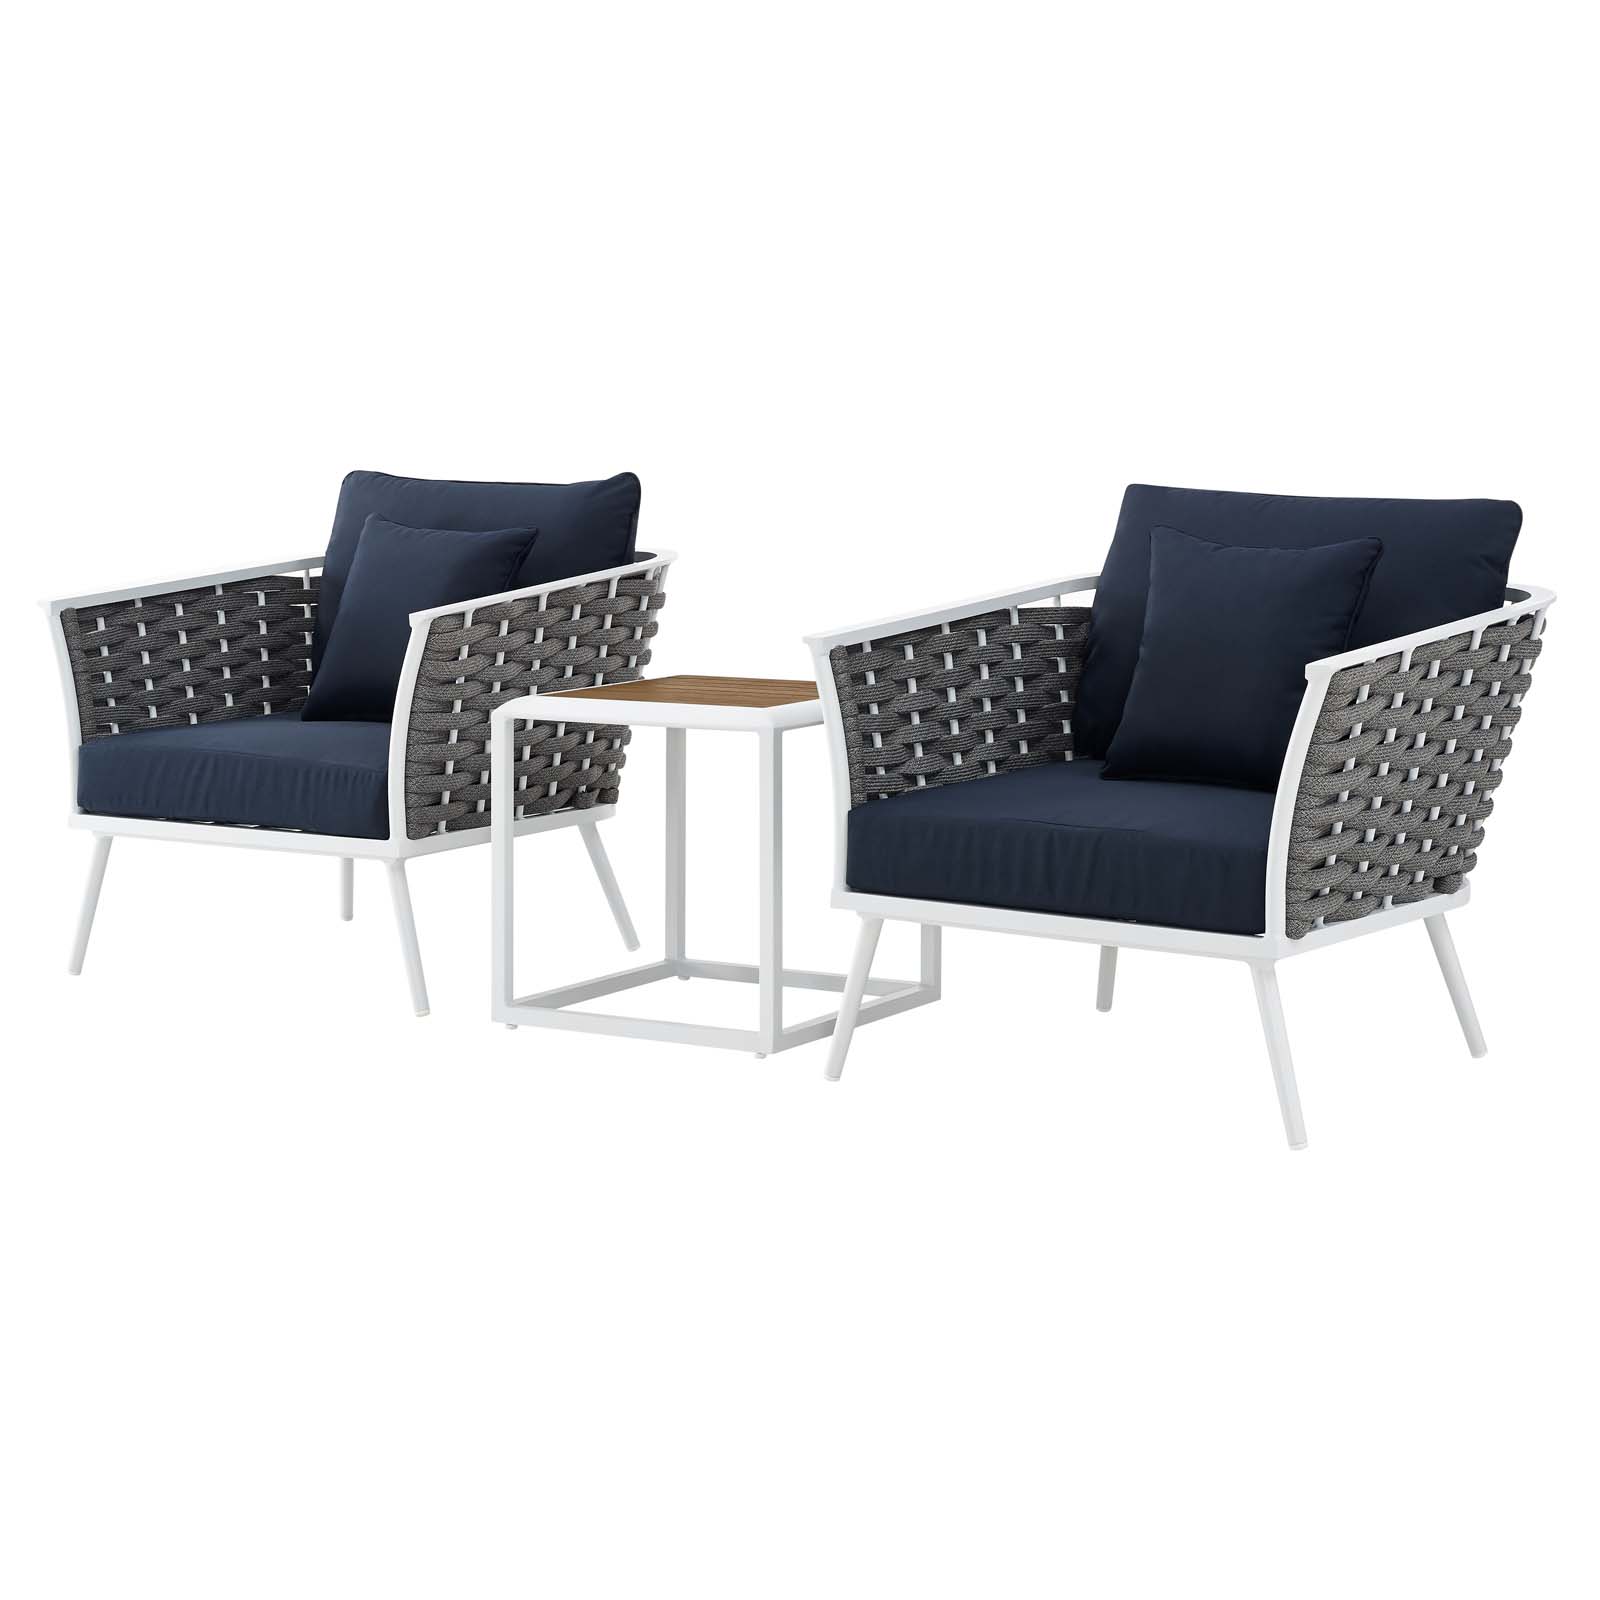 Modern Contemporary Urban Outdoor Patio Balcony Garden Furniture Lounge Chair Armchair and Side Table Set, Fabric Aluminium, White Navy - image 1 of 8